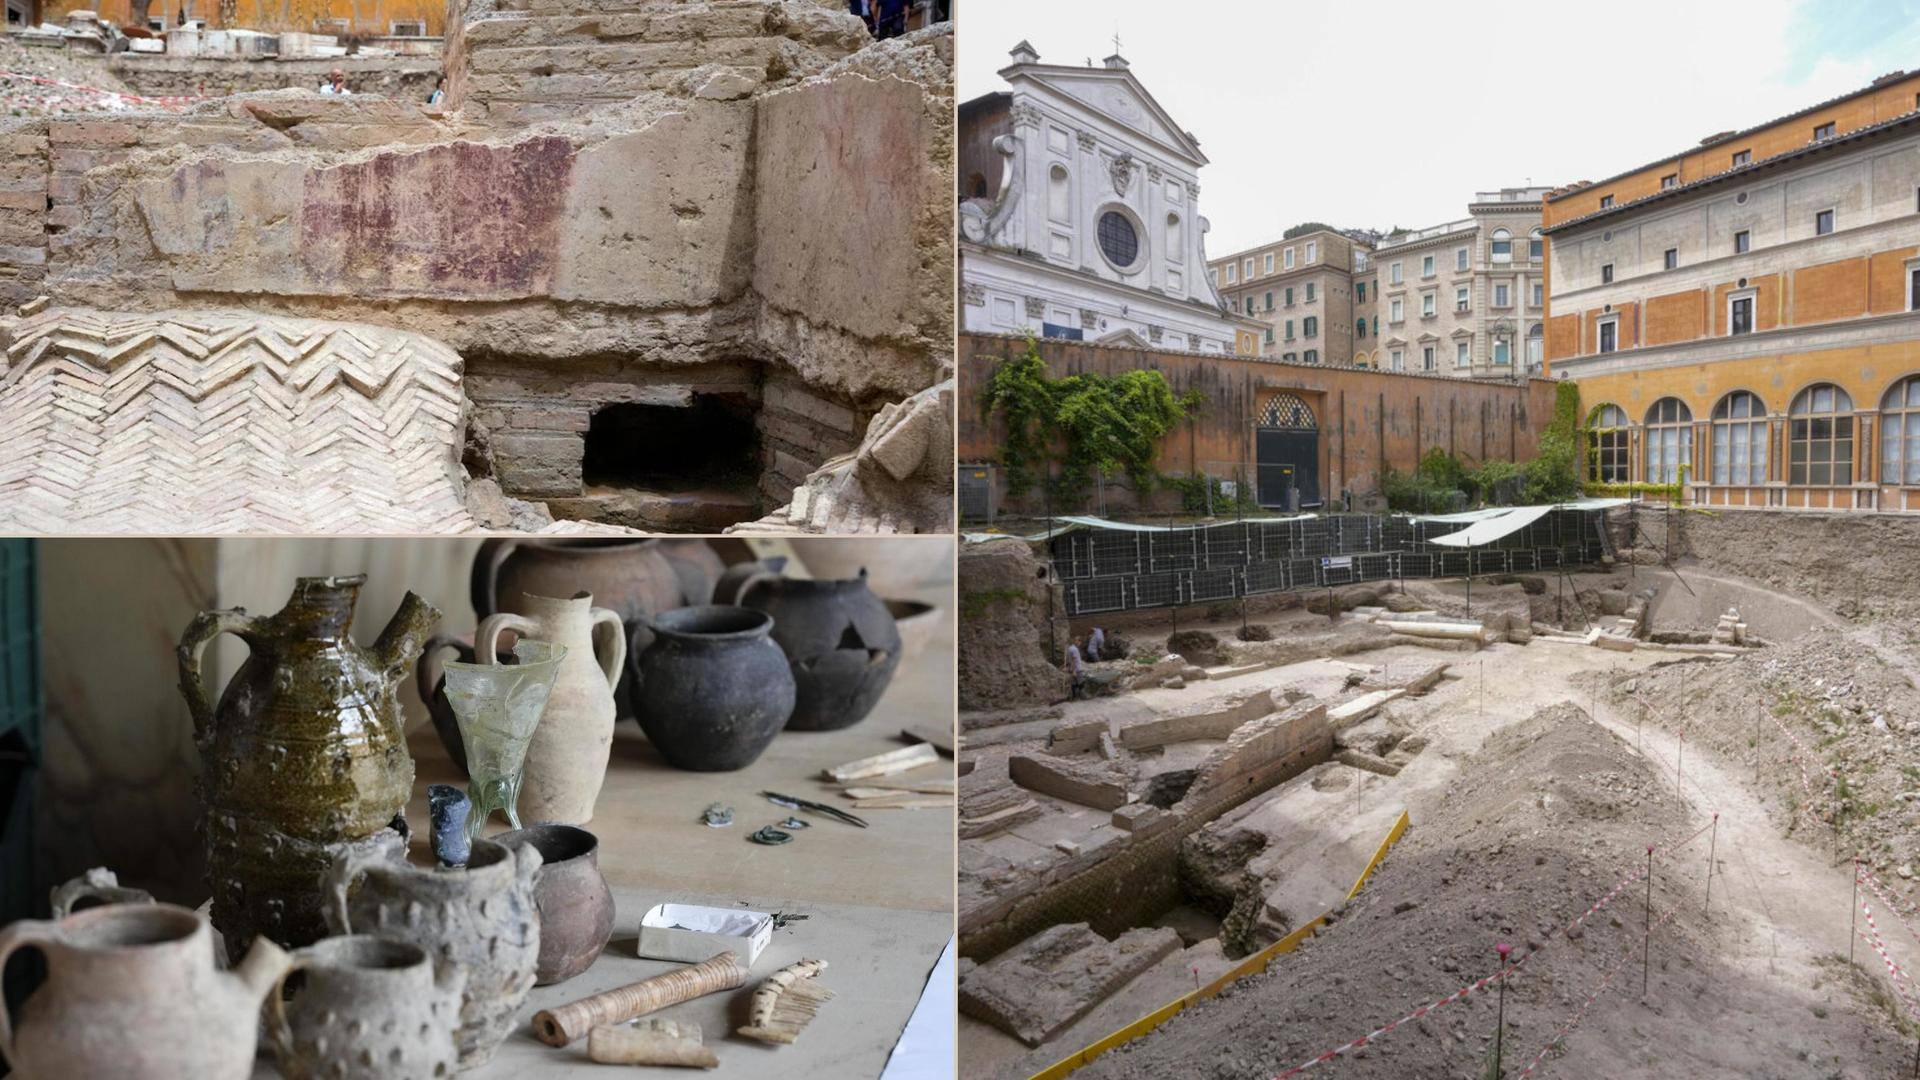 Emperor Nero's long-lost theater unearthed at Rome hotel site